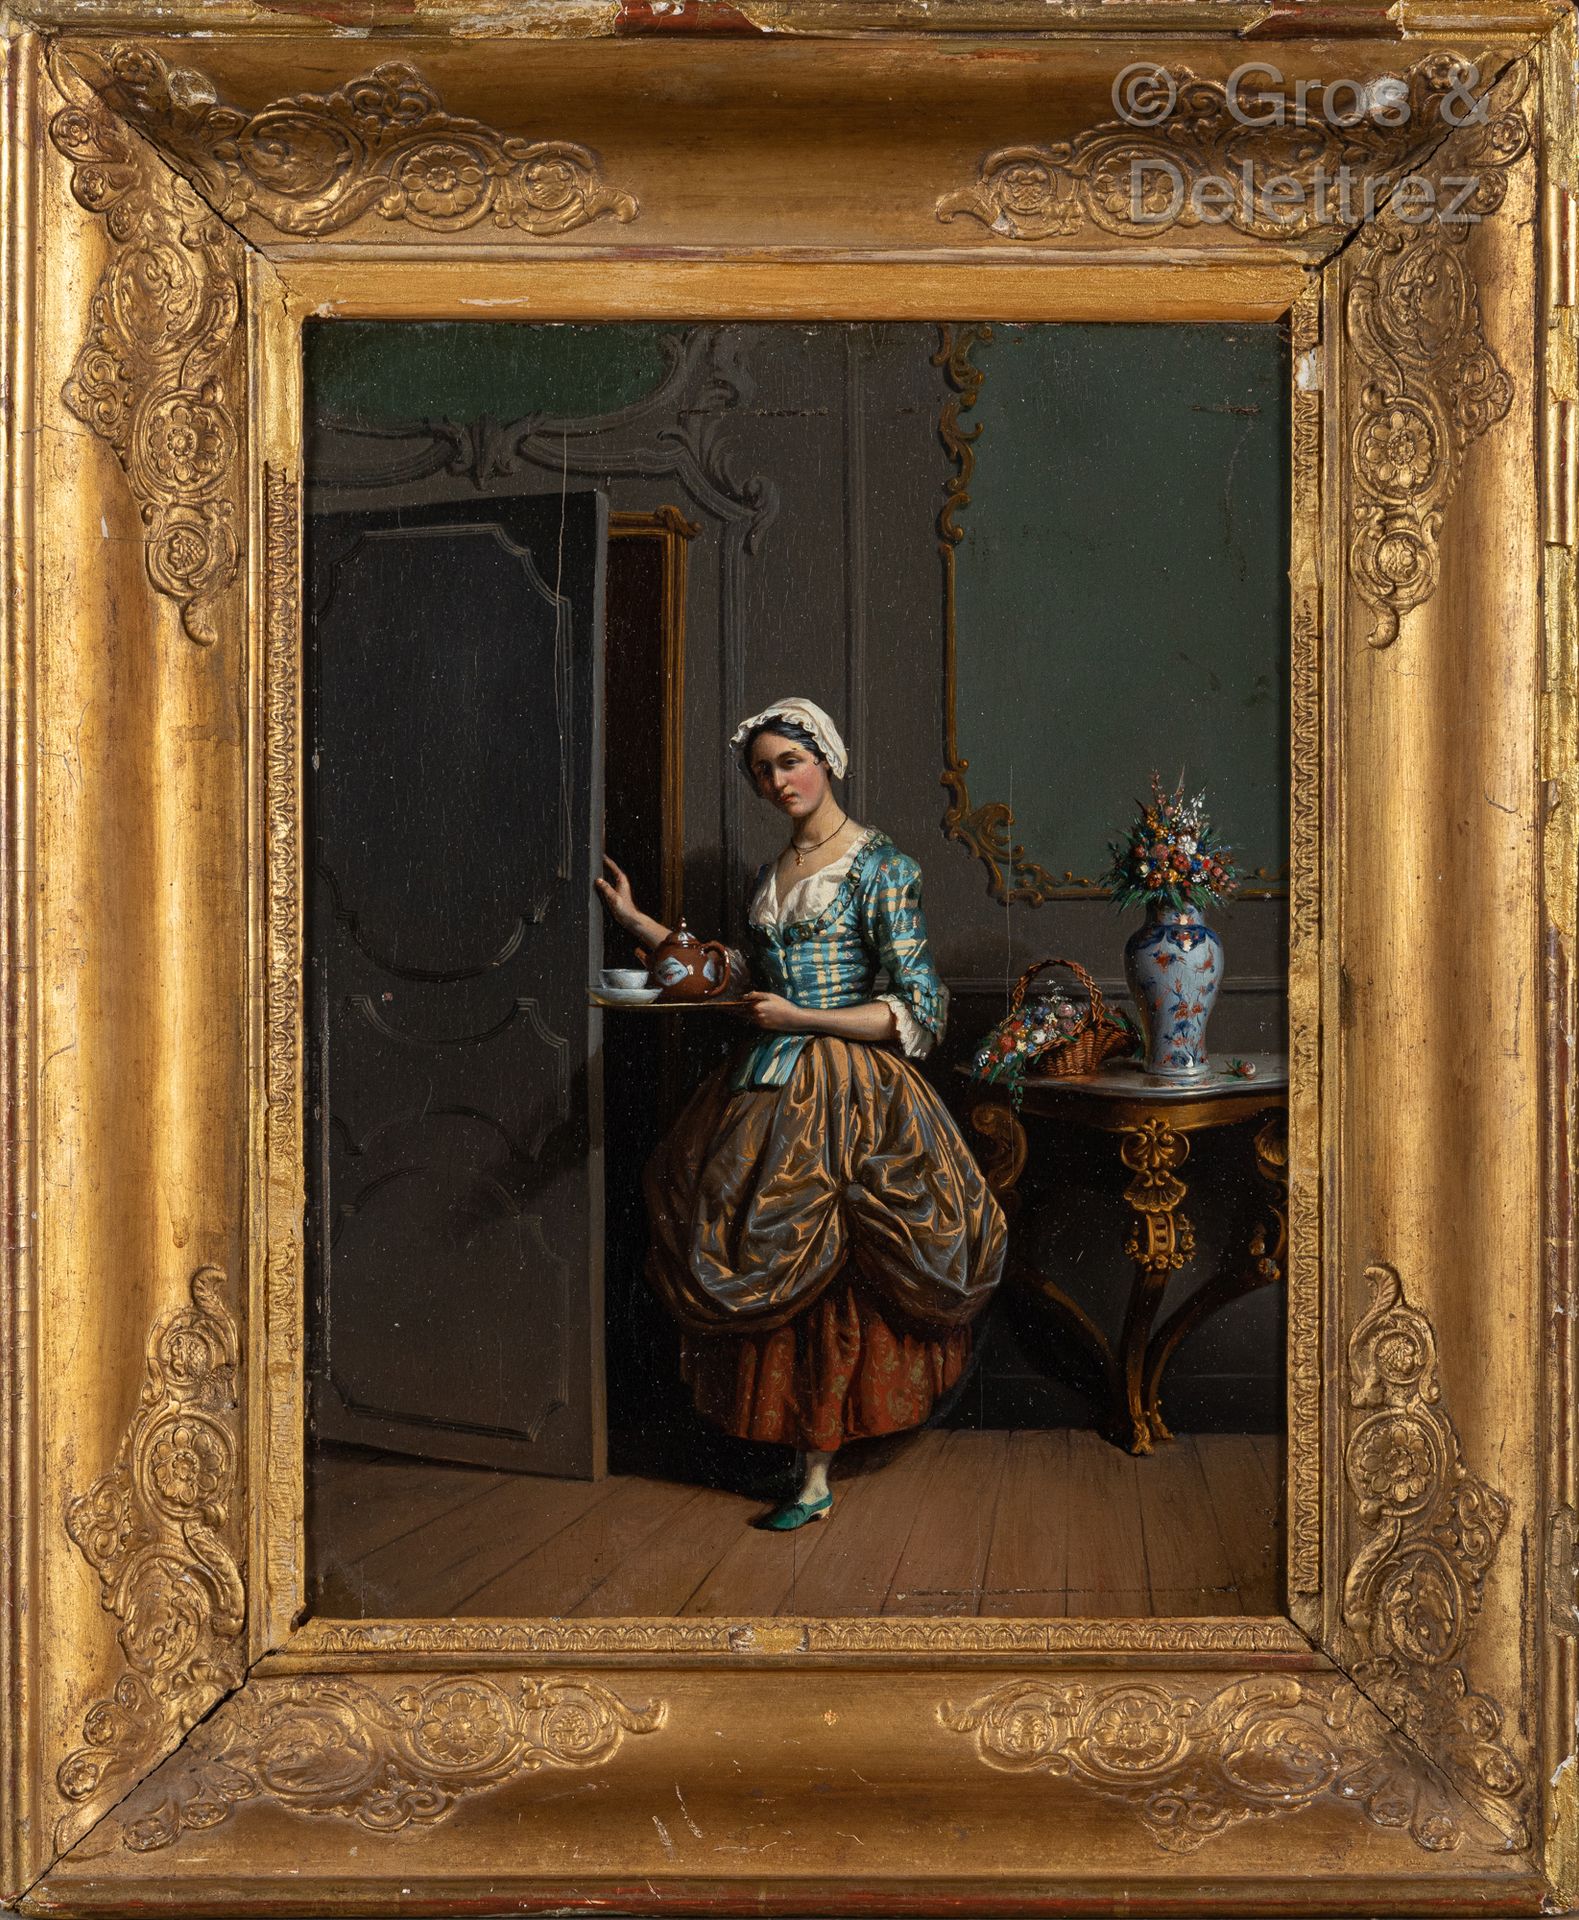 Null FRENCH SCHOOL circa 1800

Woman in an interior

Oil on oak panel.

31,5 x 2&hellip;